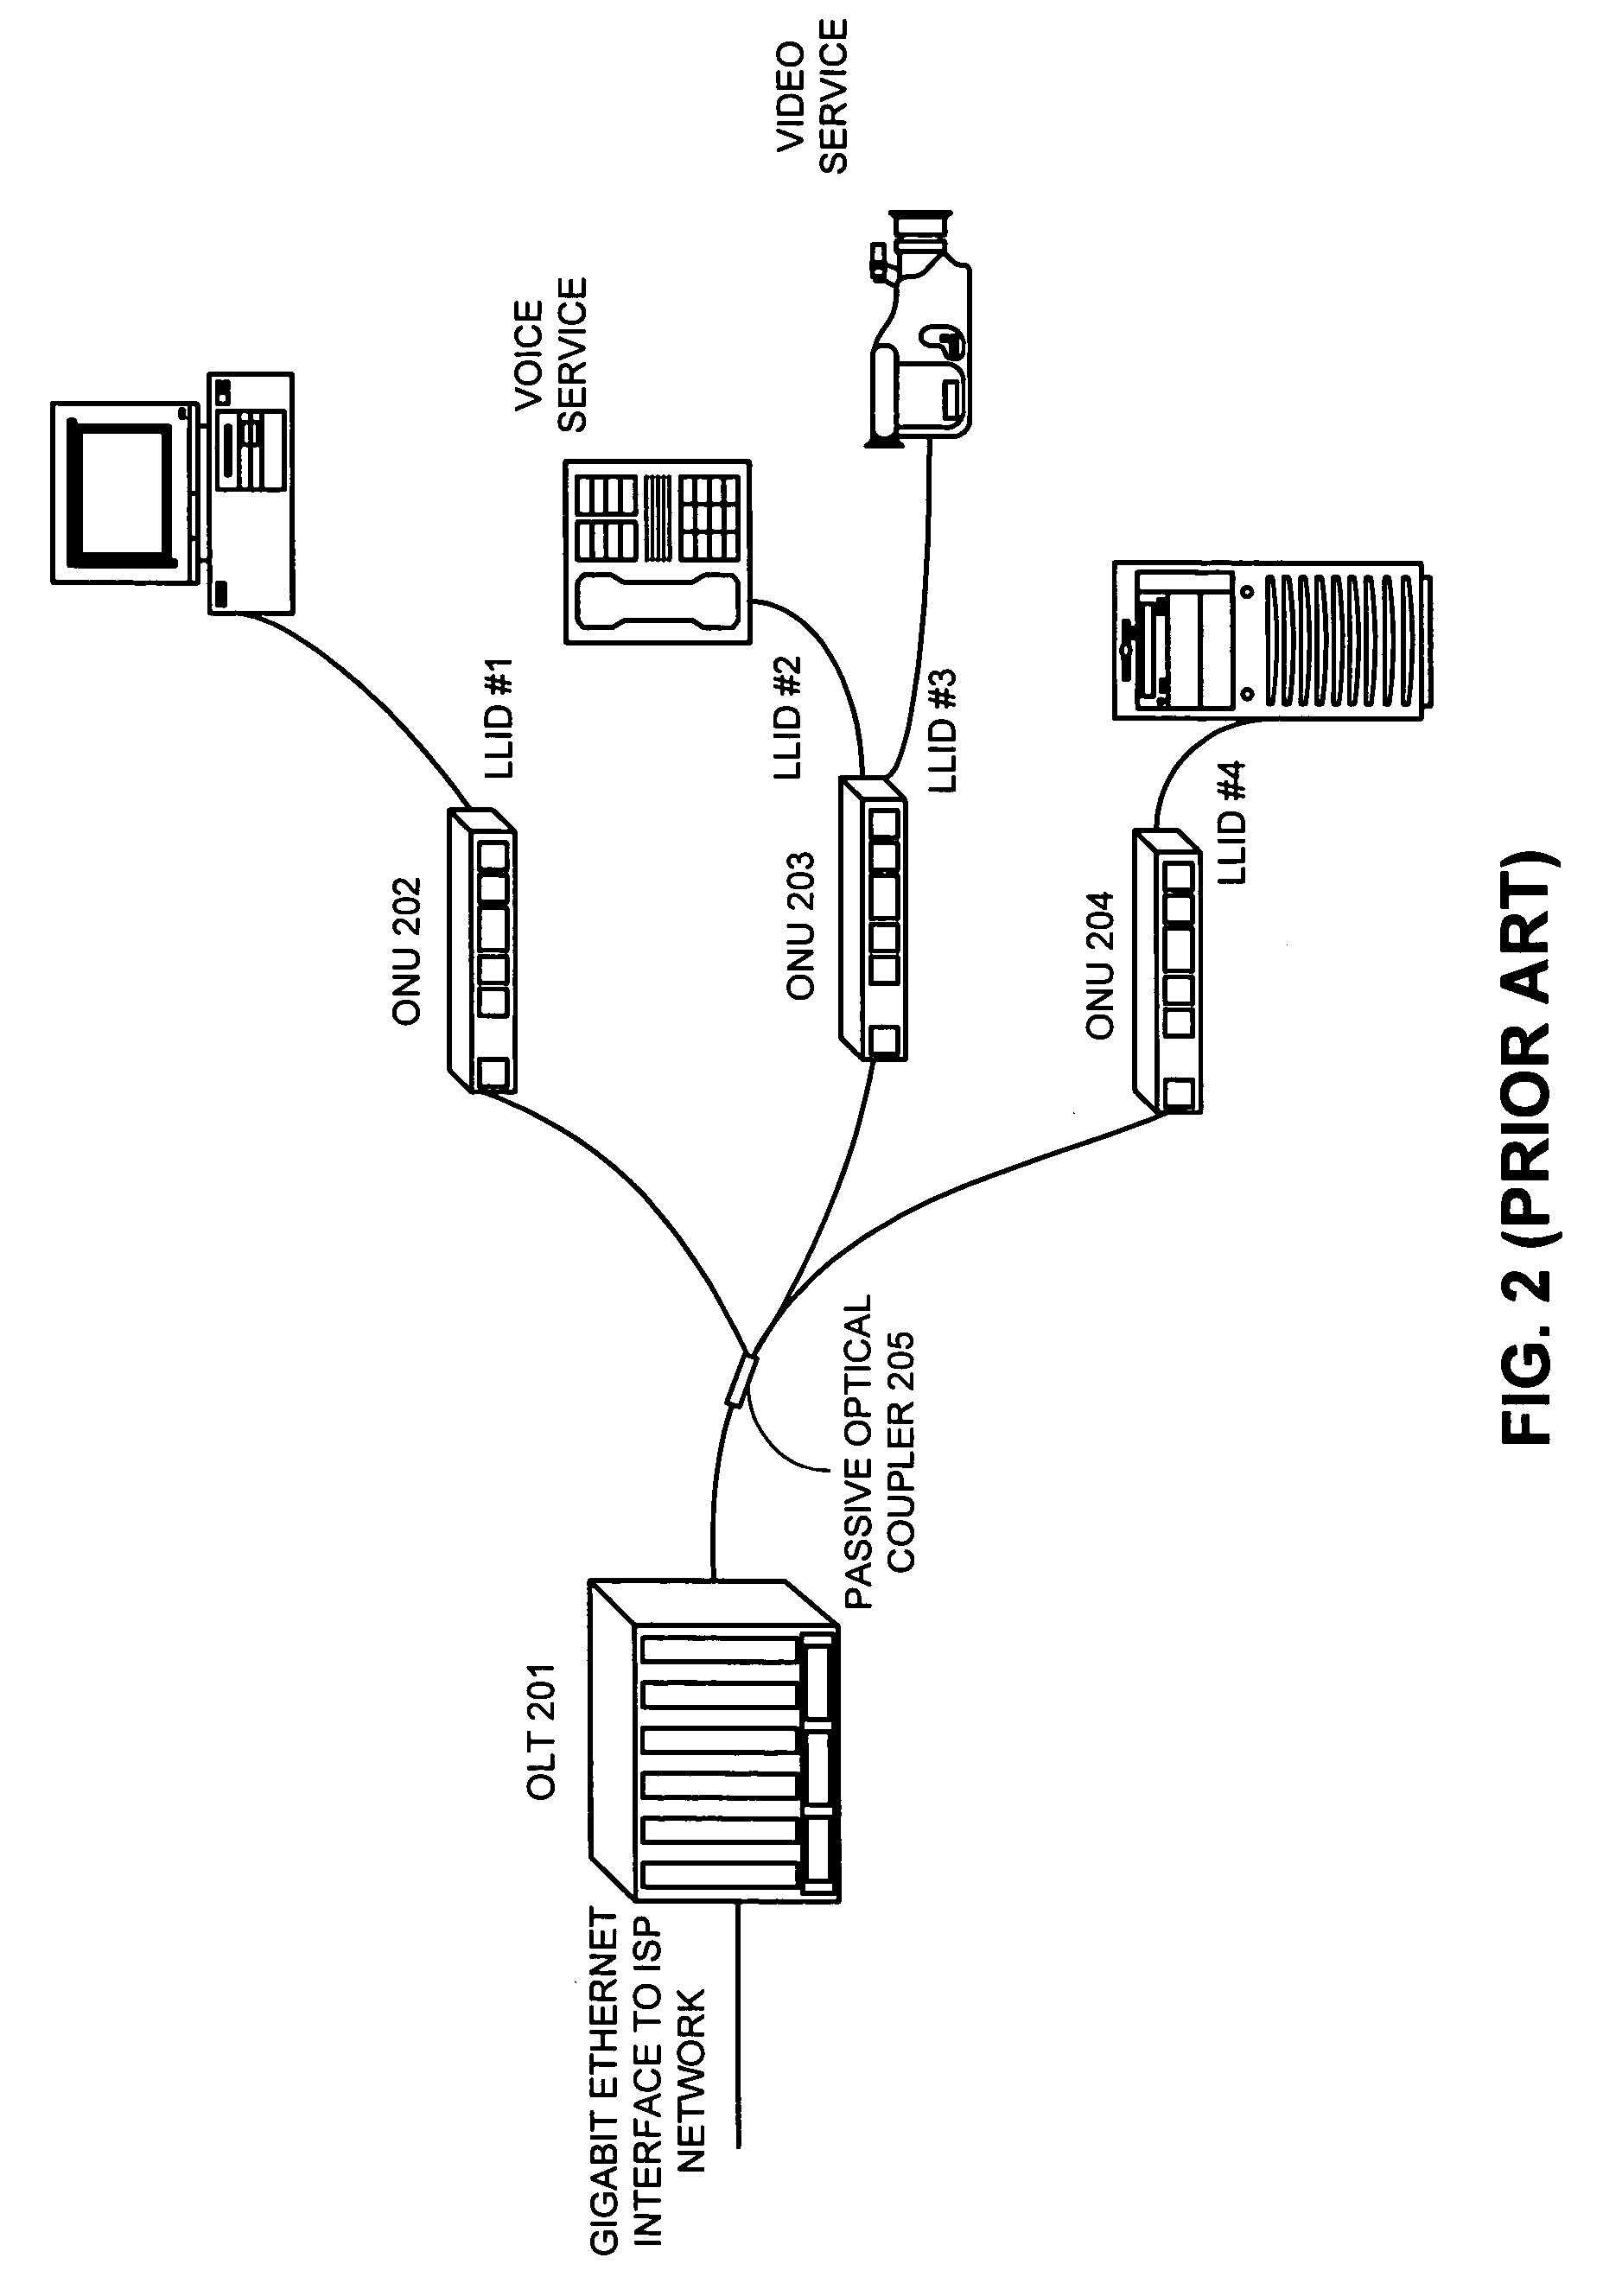 Method and apparatus for bandwidth-efficient multicast in ethernet passive optical networks